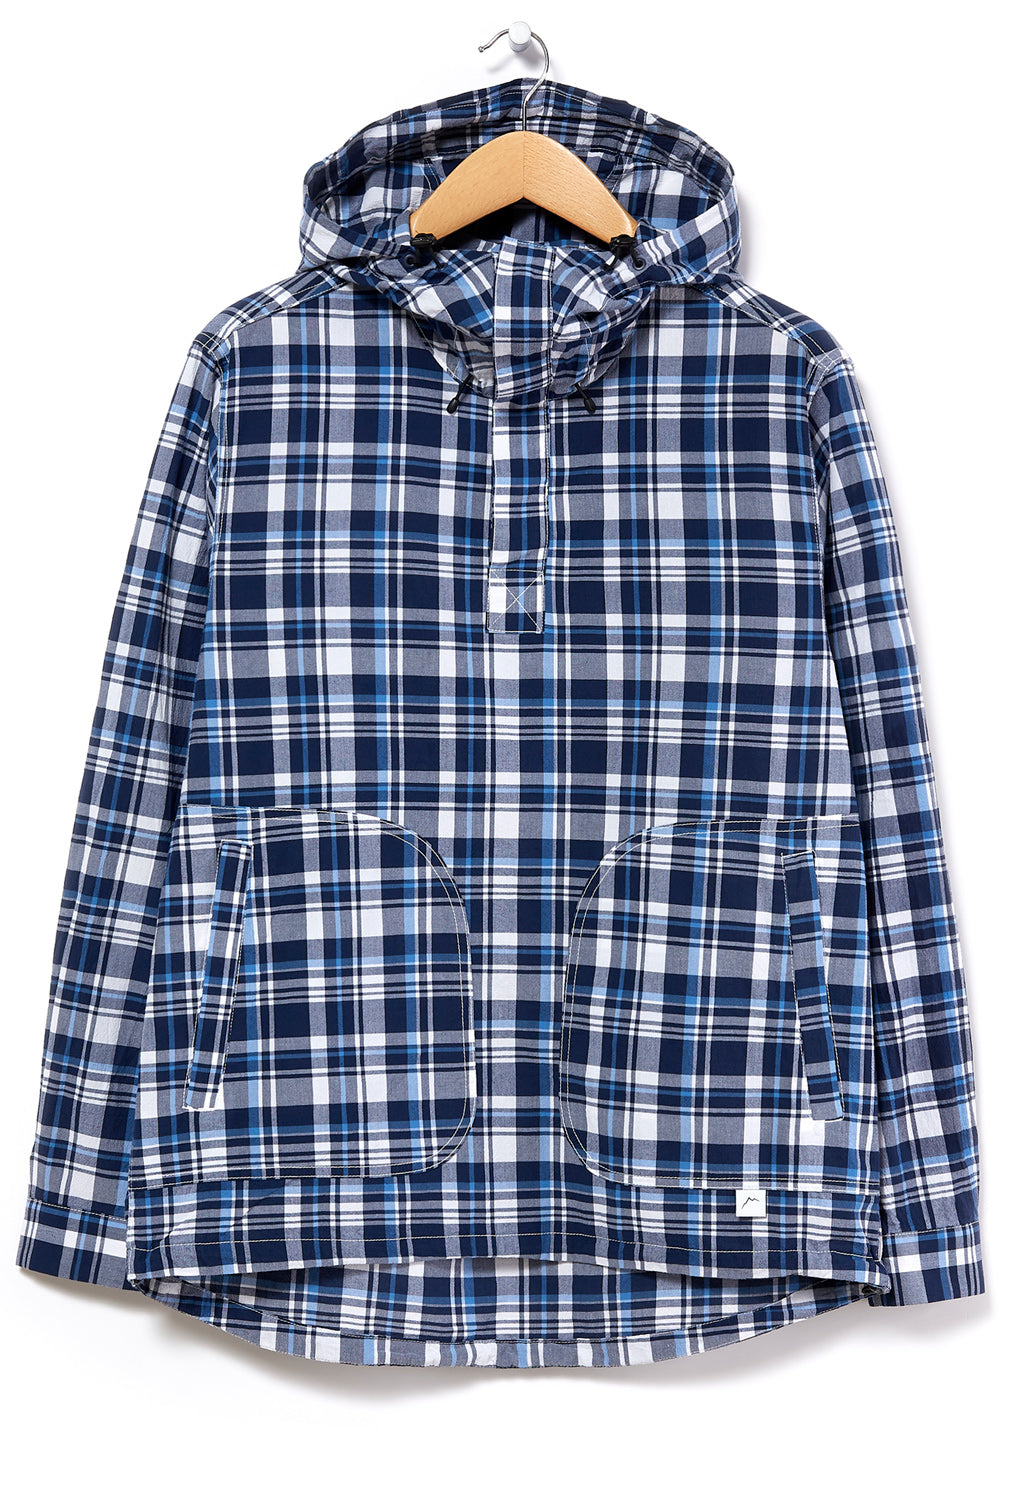 CAYL Men's Light Cotton Pullover Hoodie - Blue Check – Outsiders Store UK